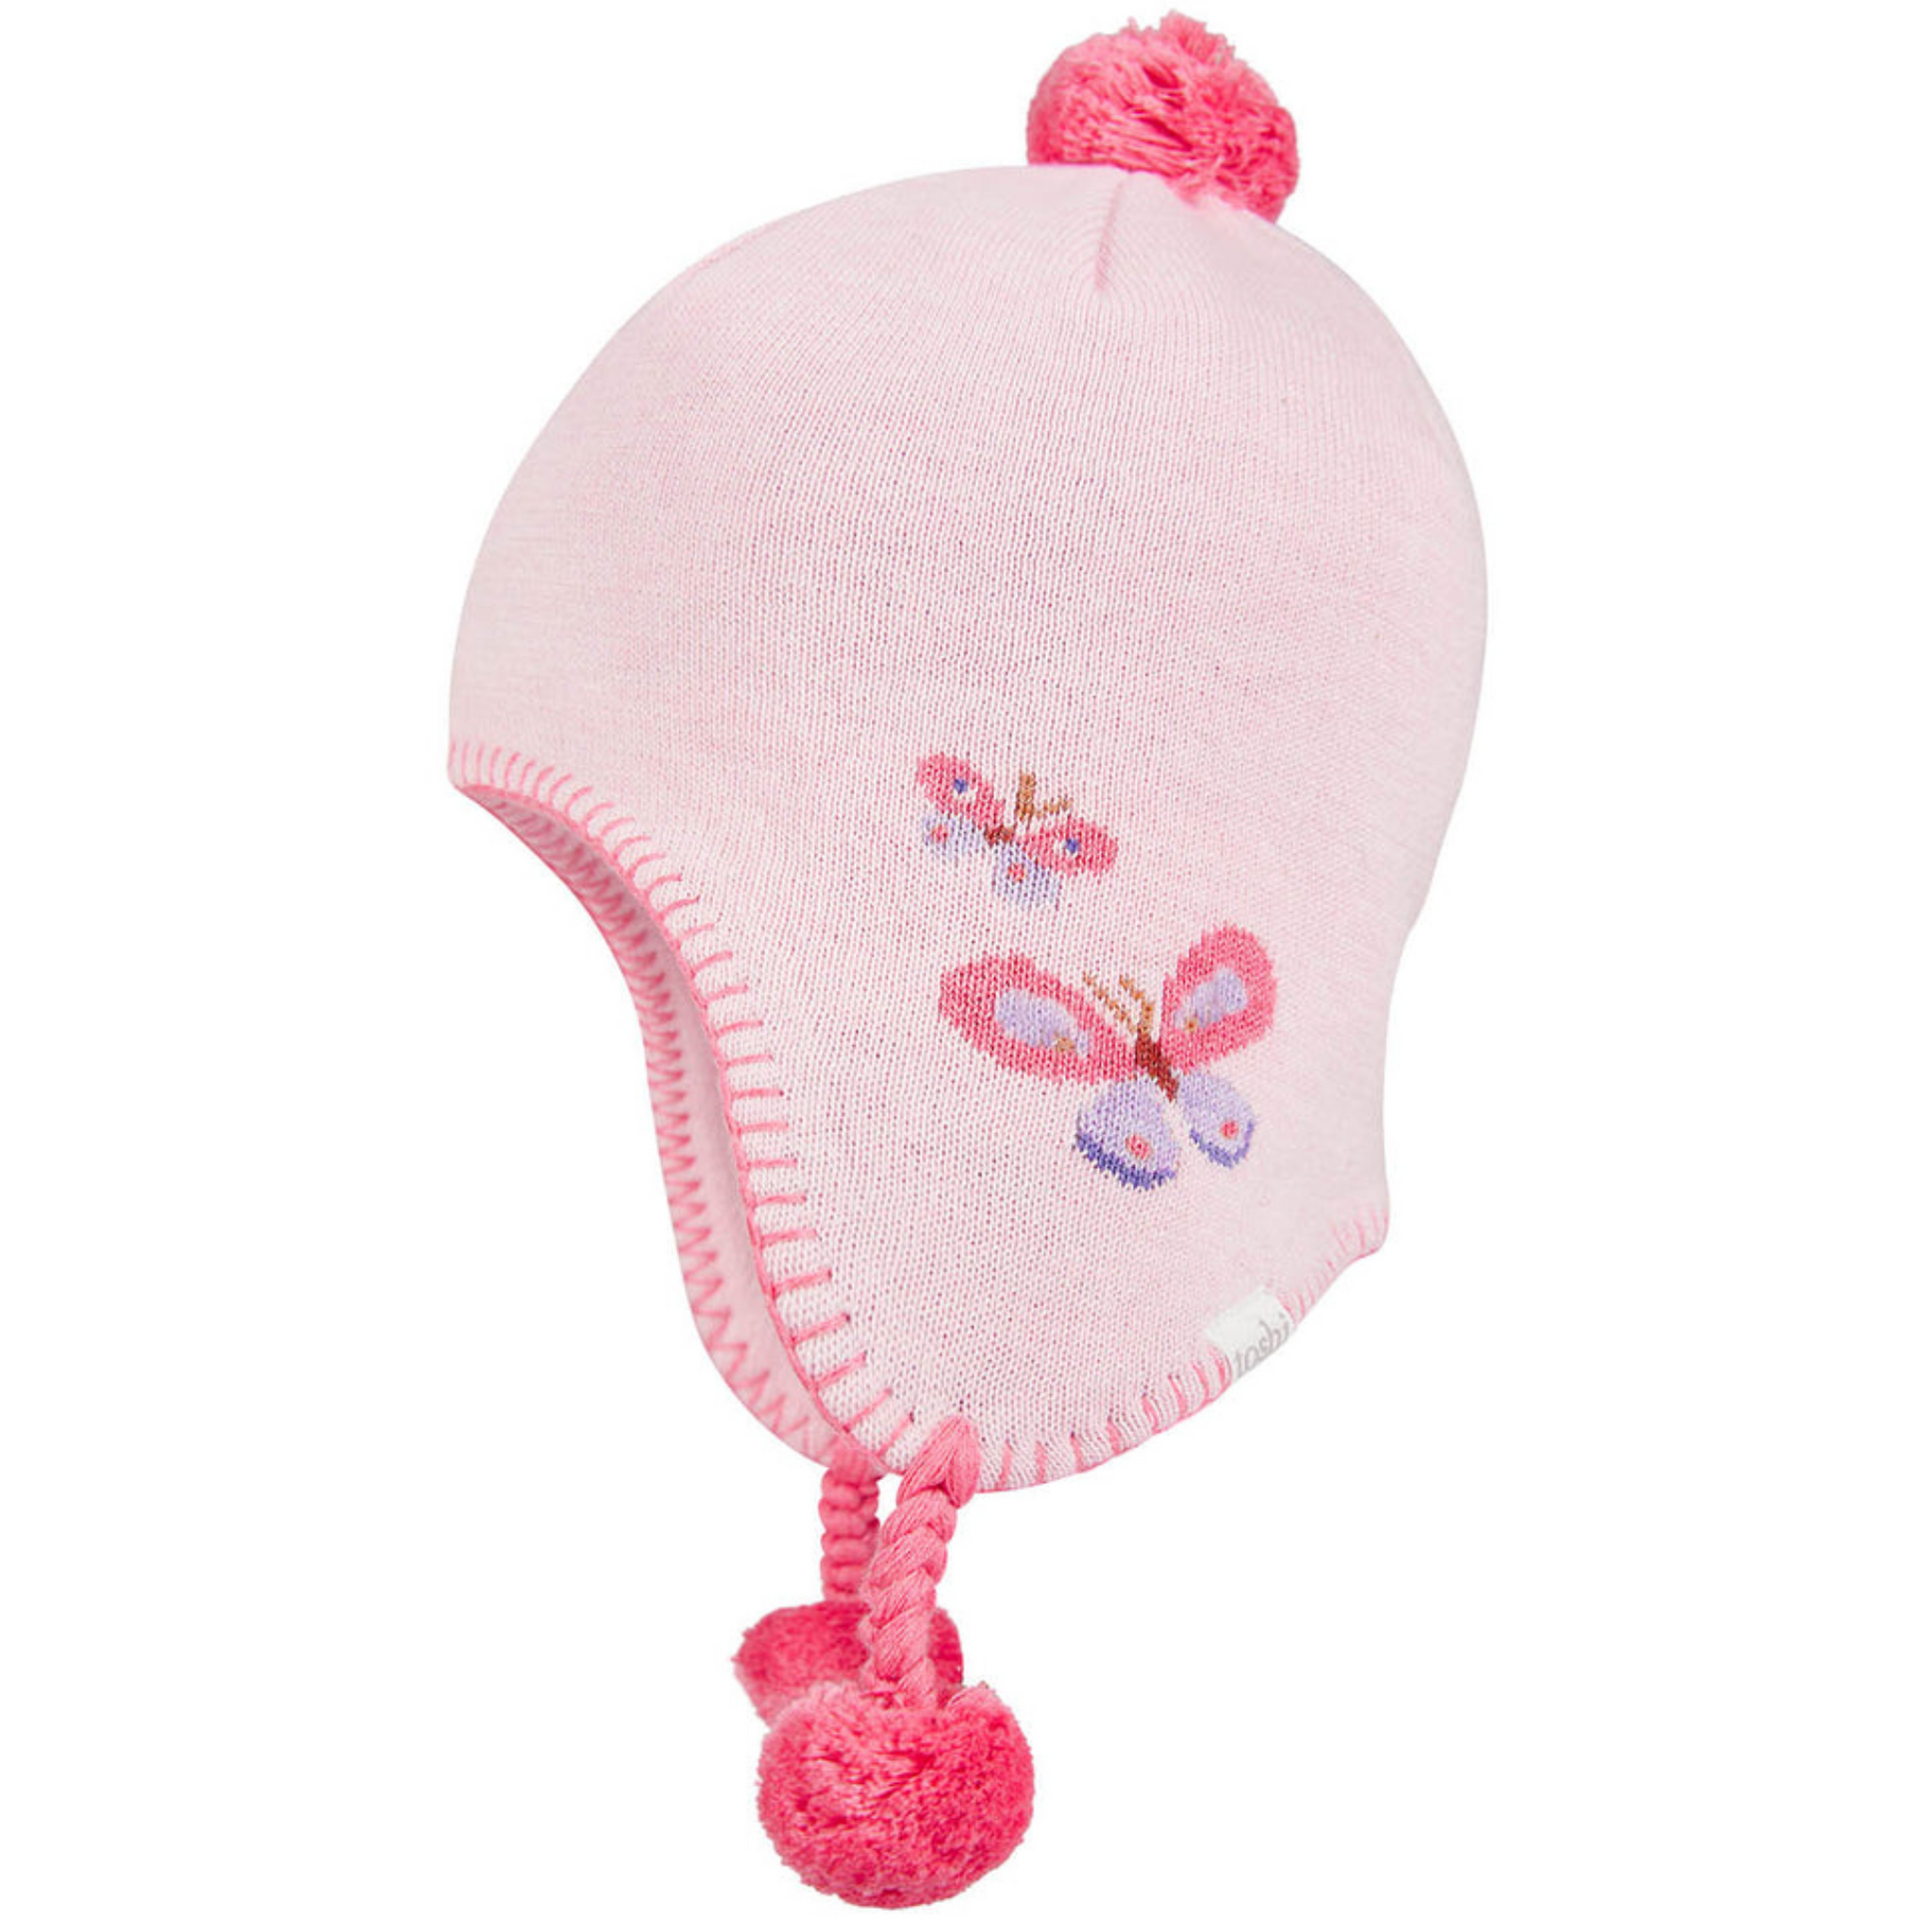 Toshi Organic Earmuff Storytime - Butterfly Bliss